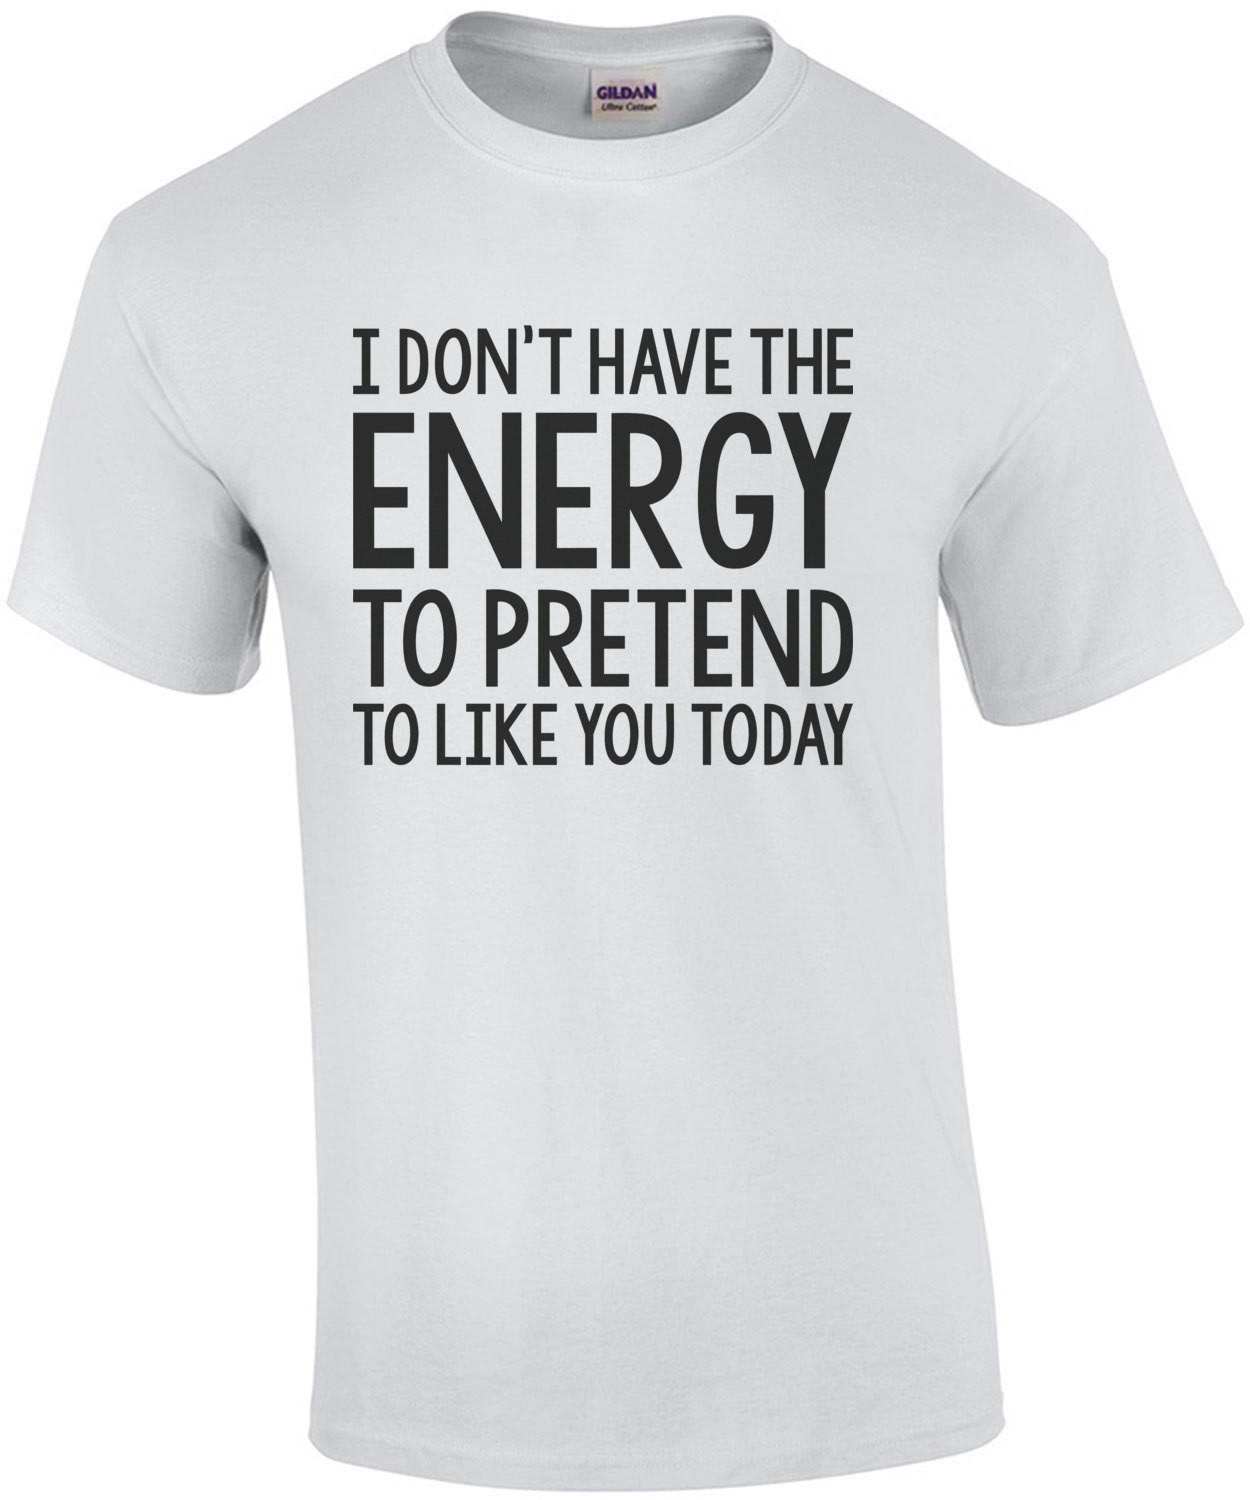 I dont have the energy to pretend to like you today - insult t-shirt